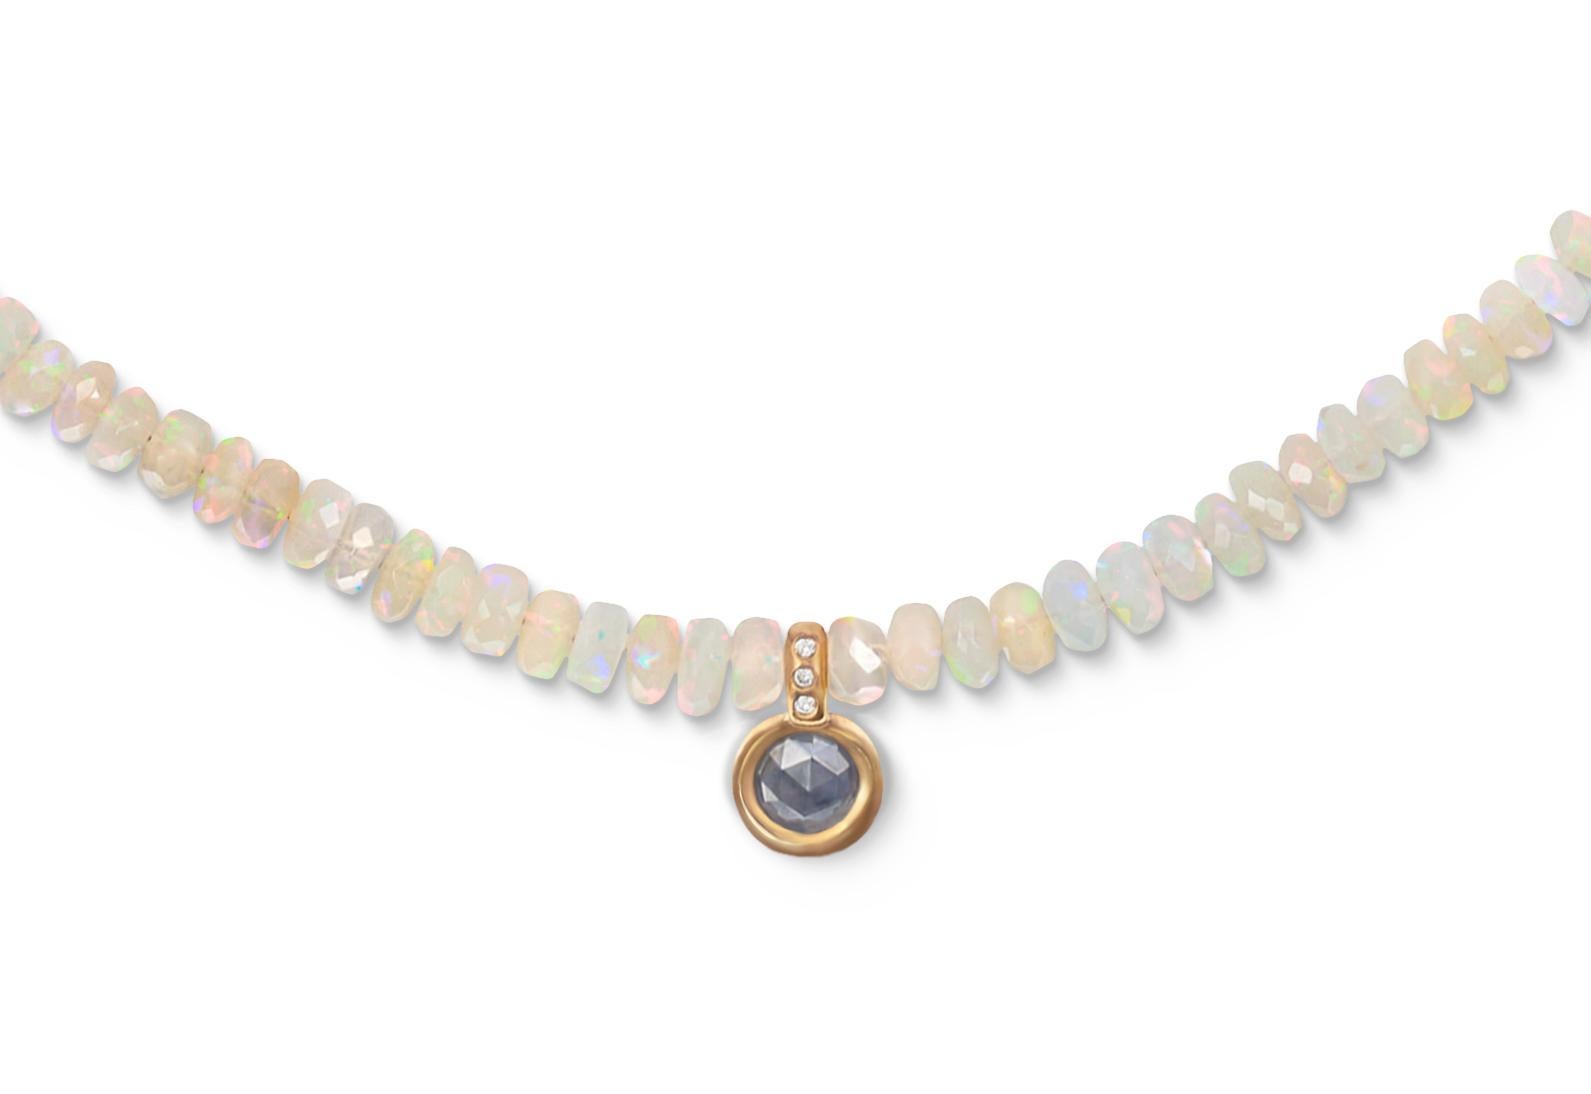 Rustic Faceted Opal Beaded Necklace with Grey Diamond and 18k Gold Pendant 1